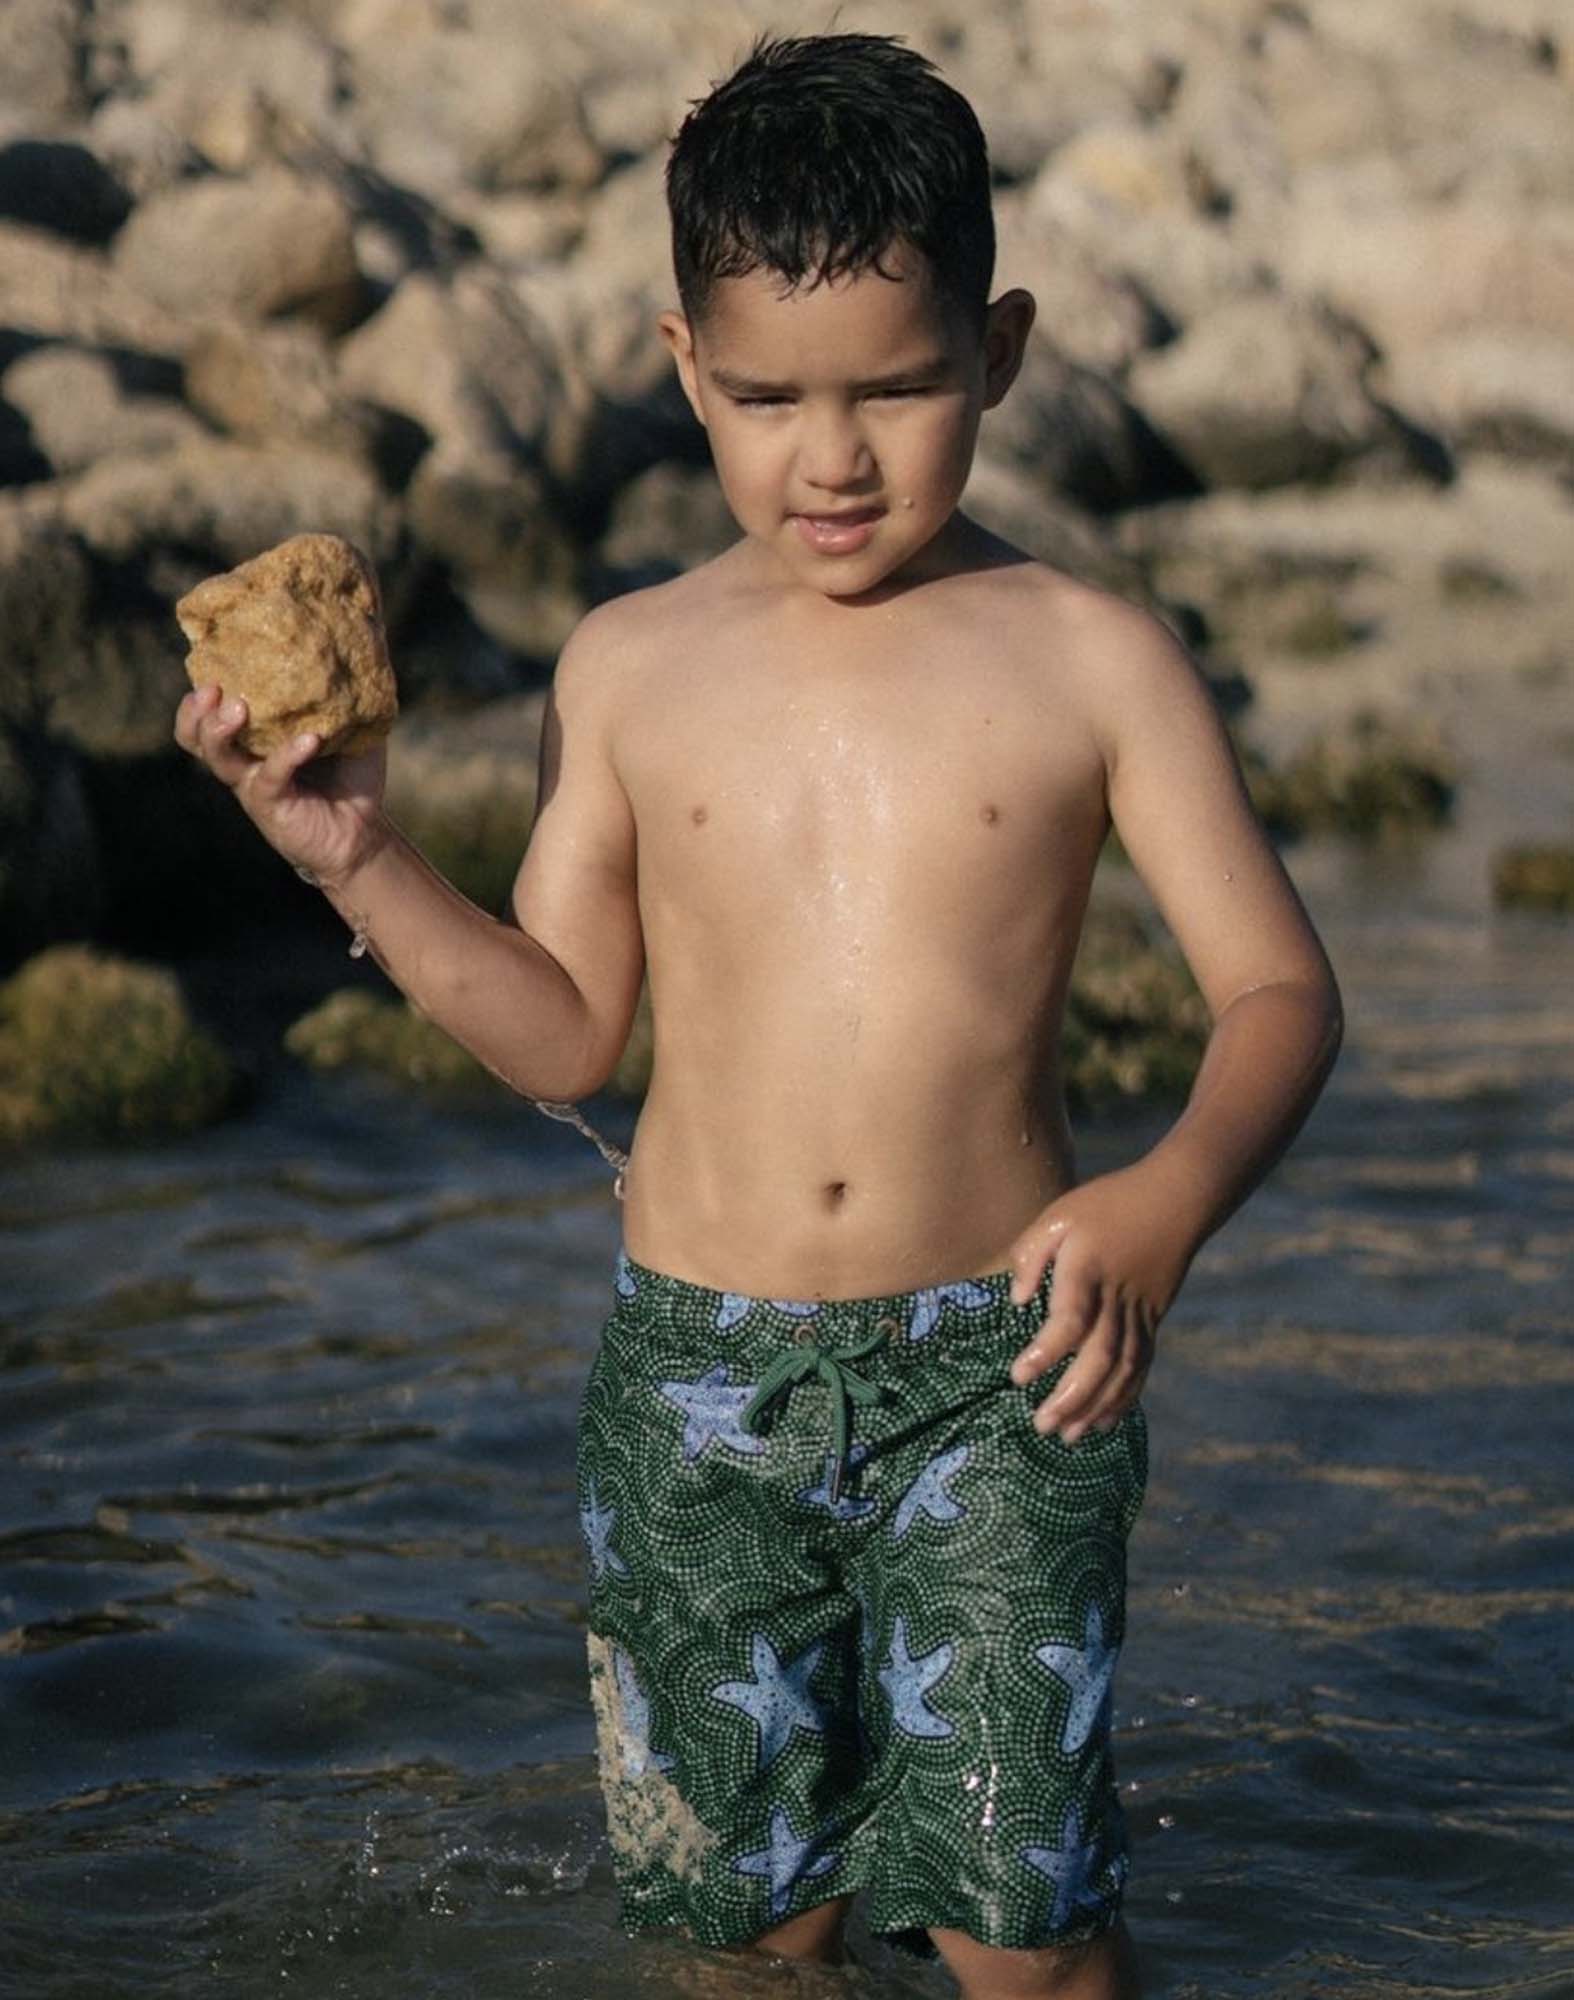 SevenC's Kids' Recycled Polyester Shorts in Star Fish Print on model at beach